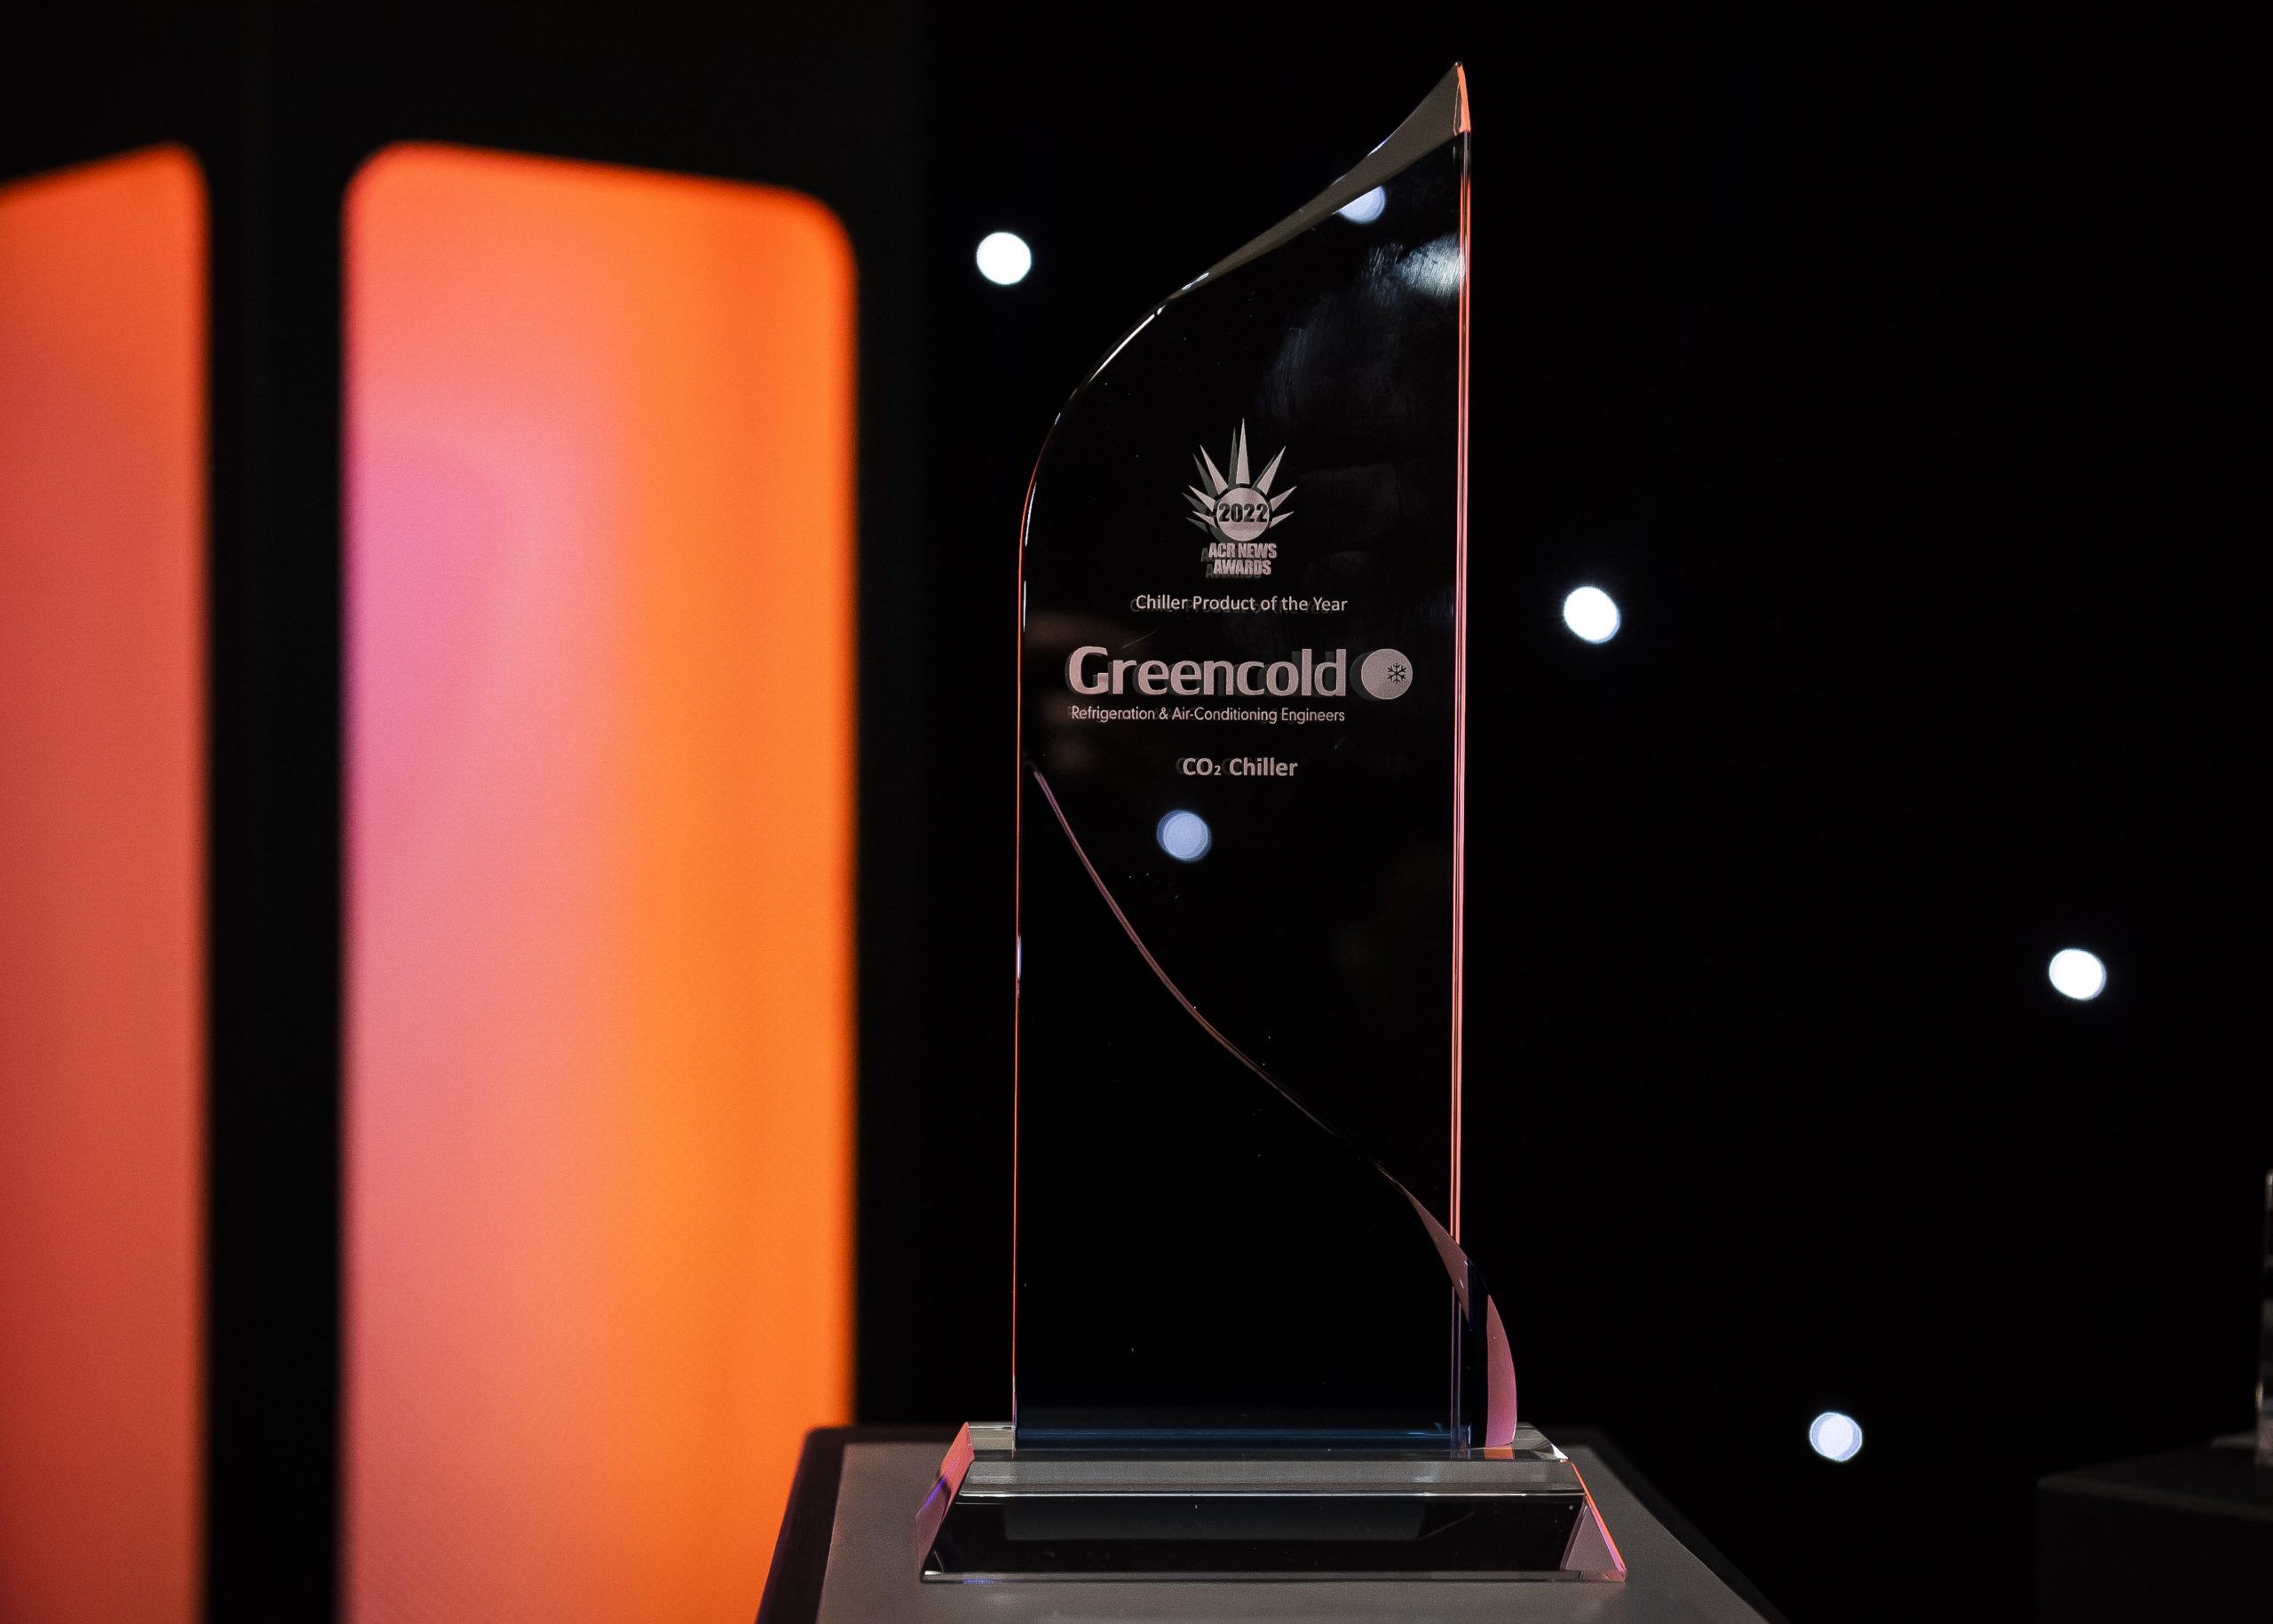 The award was given for Greencold's innovative CO2 Water Chiller